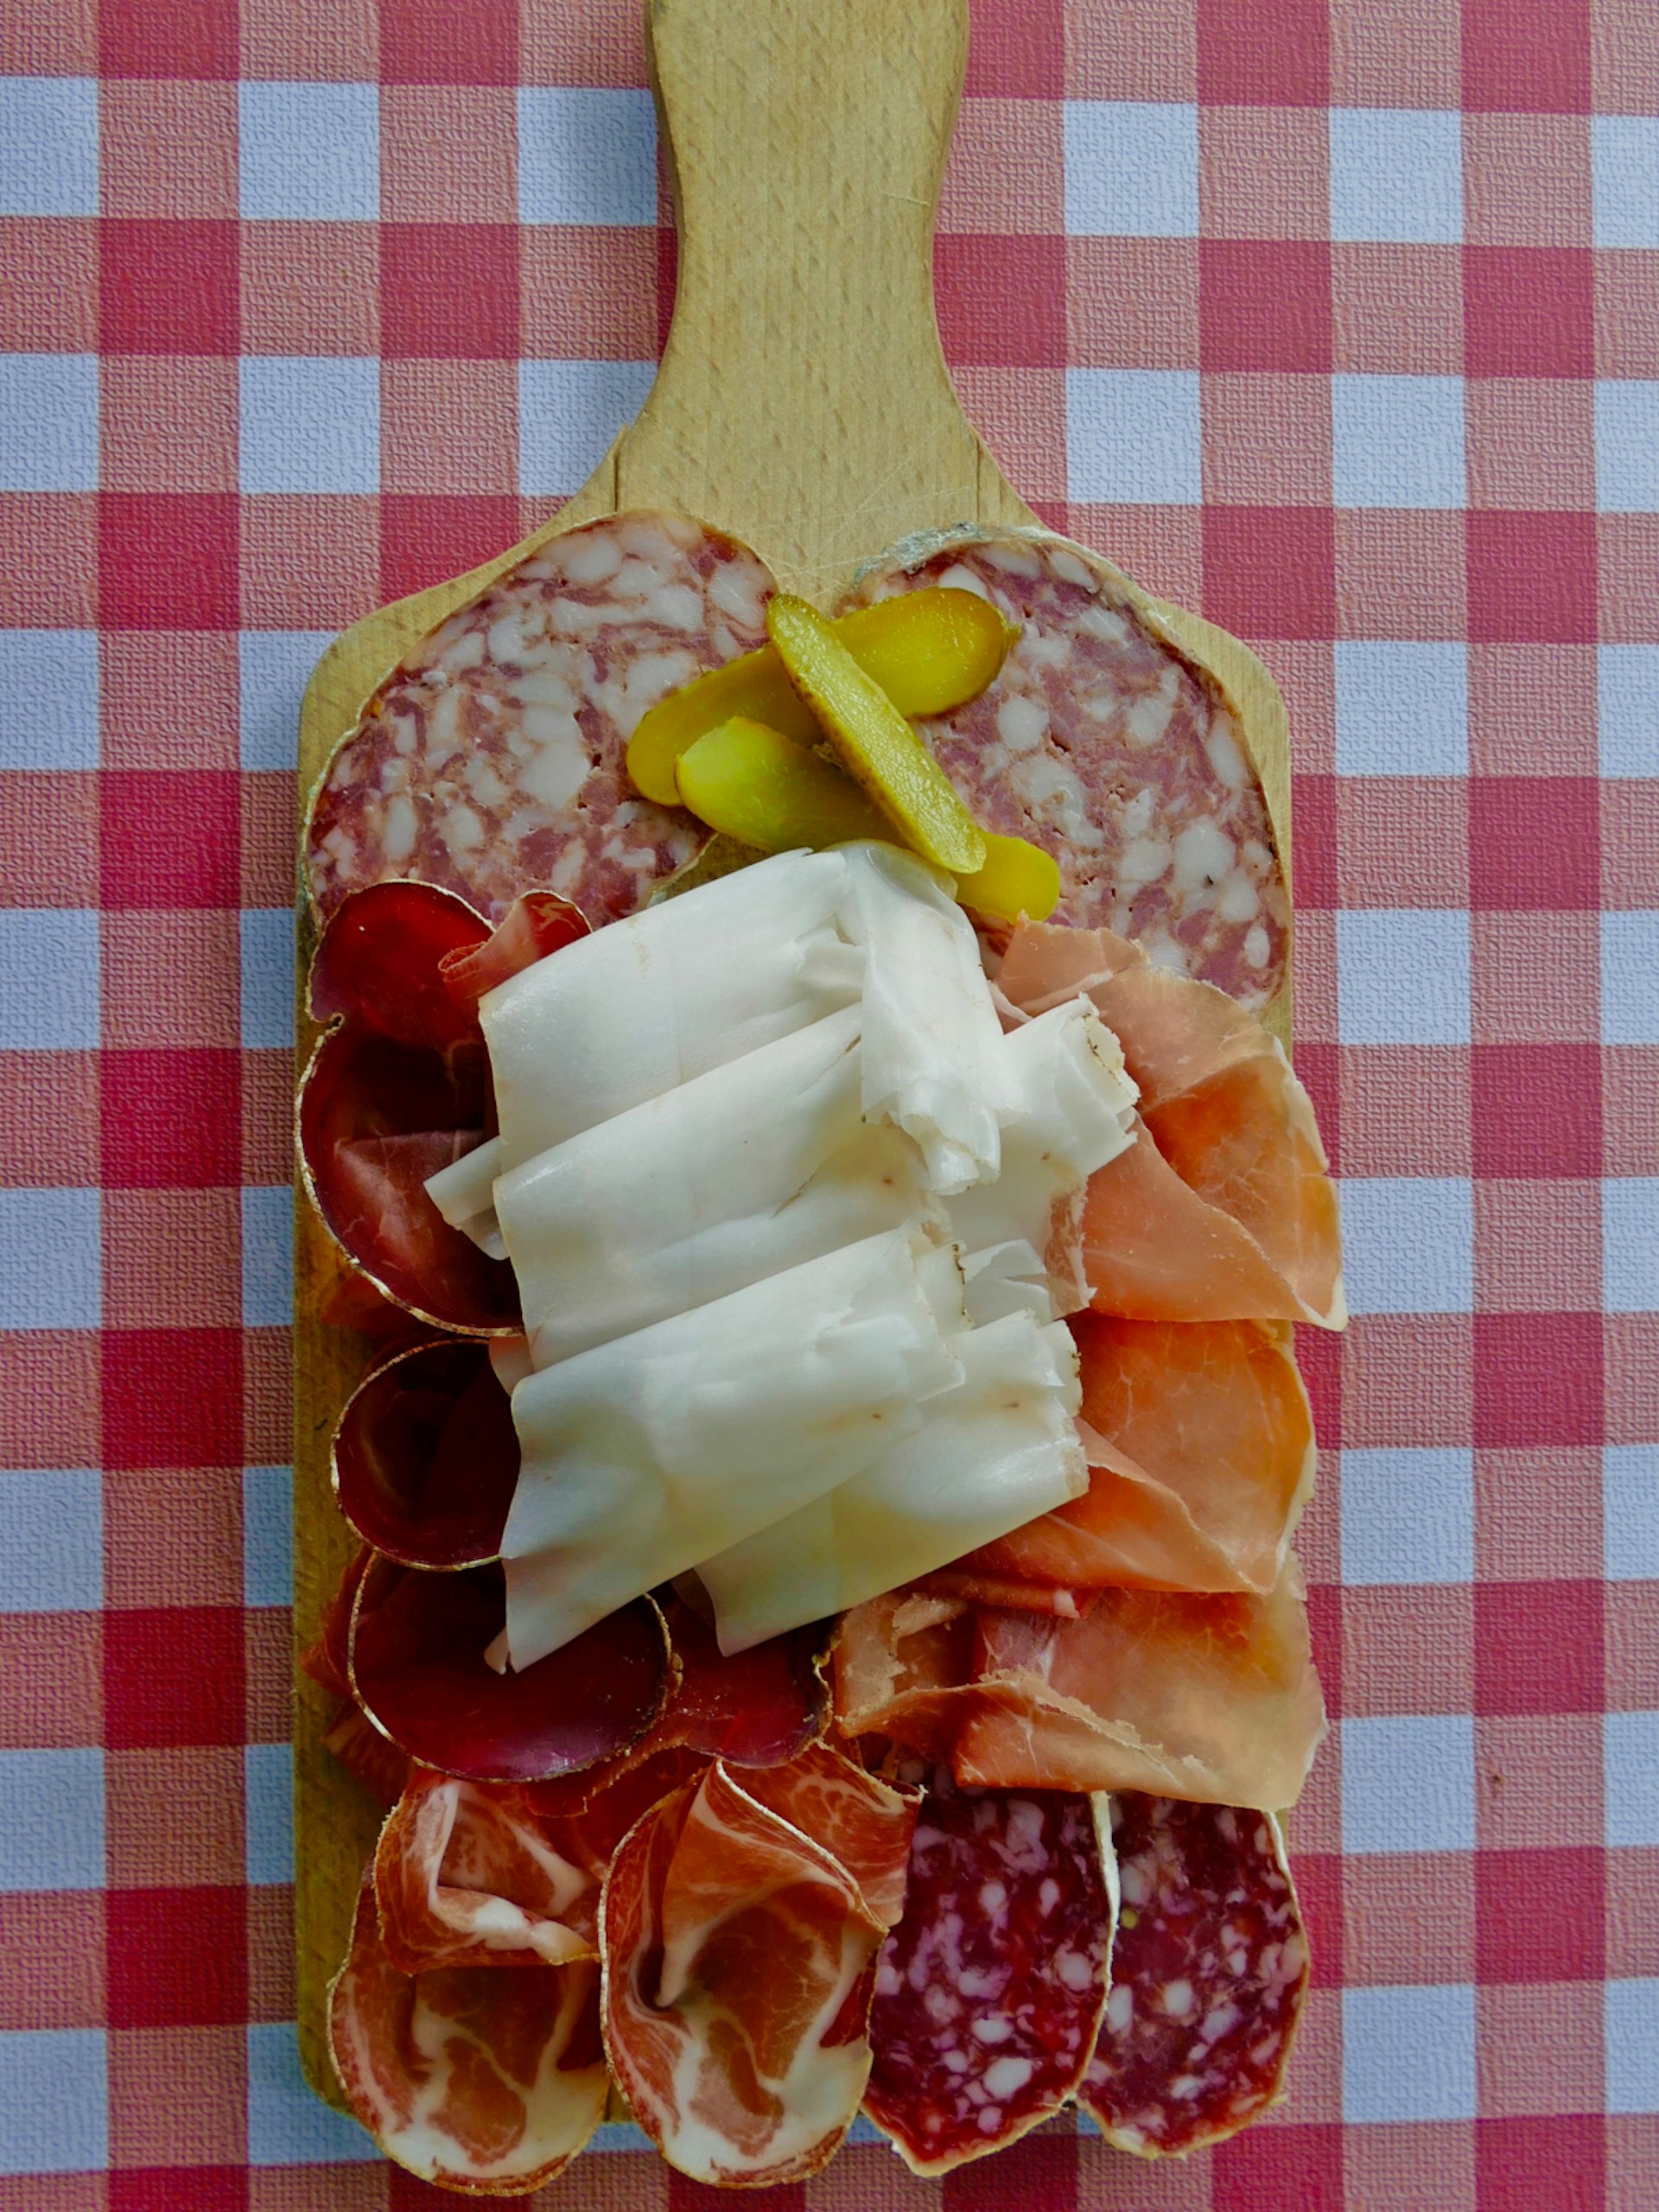 A locally-sourced charcuterie board from Ticino, Switzerland © Sarah Gilbert / Lonely Planet